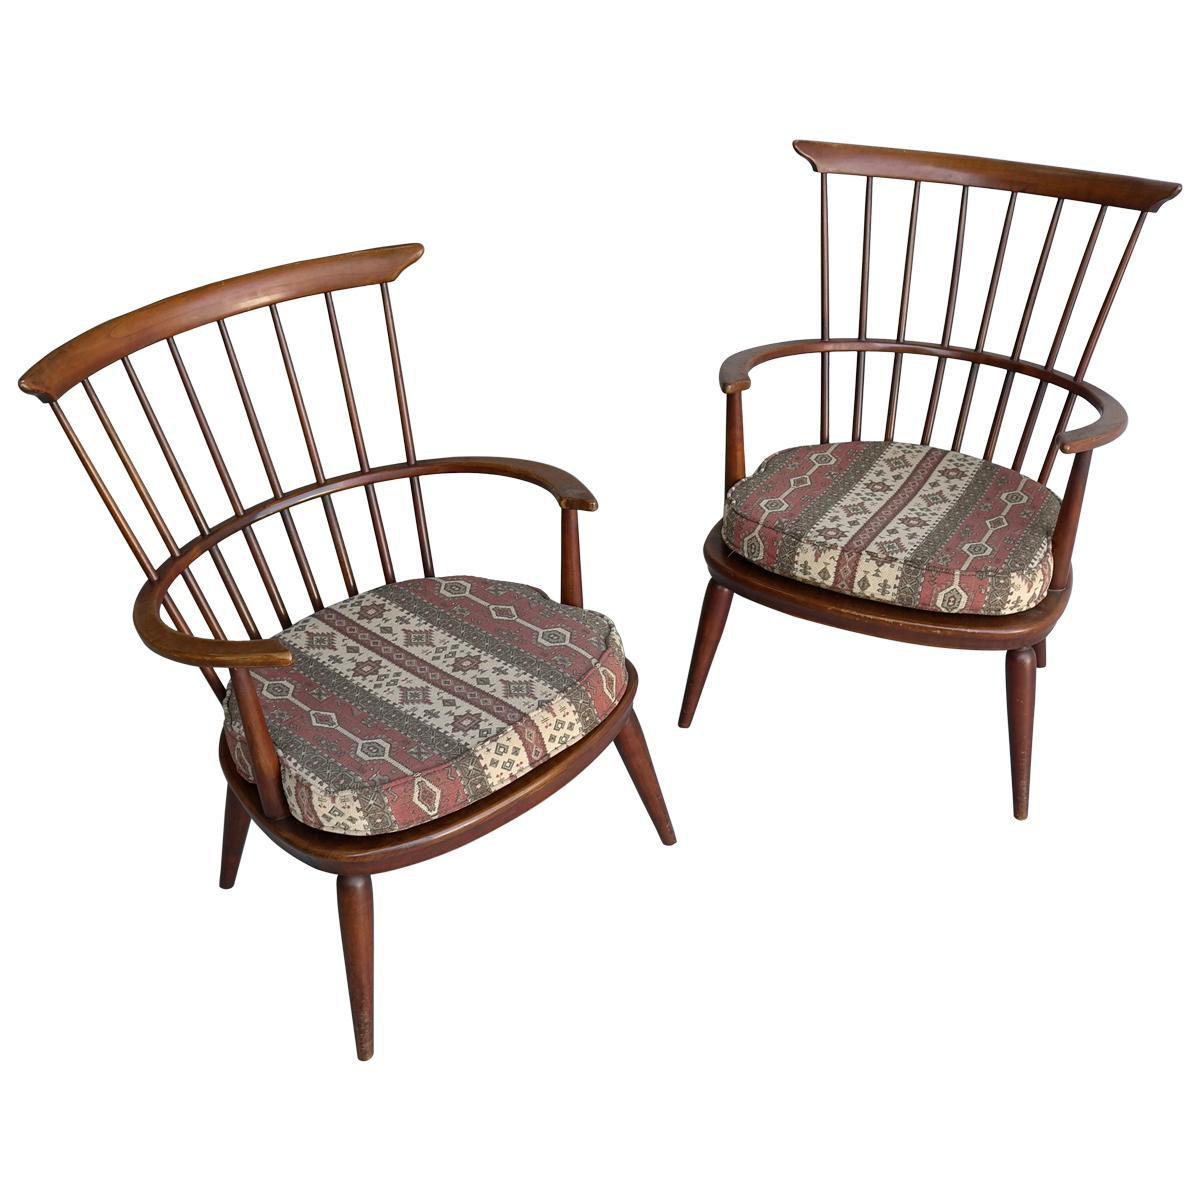 Pair of Wooden Windsor Armchairs by Luigi Ercolani